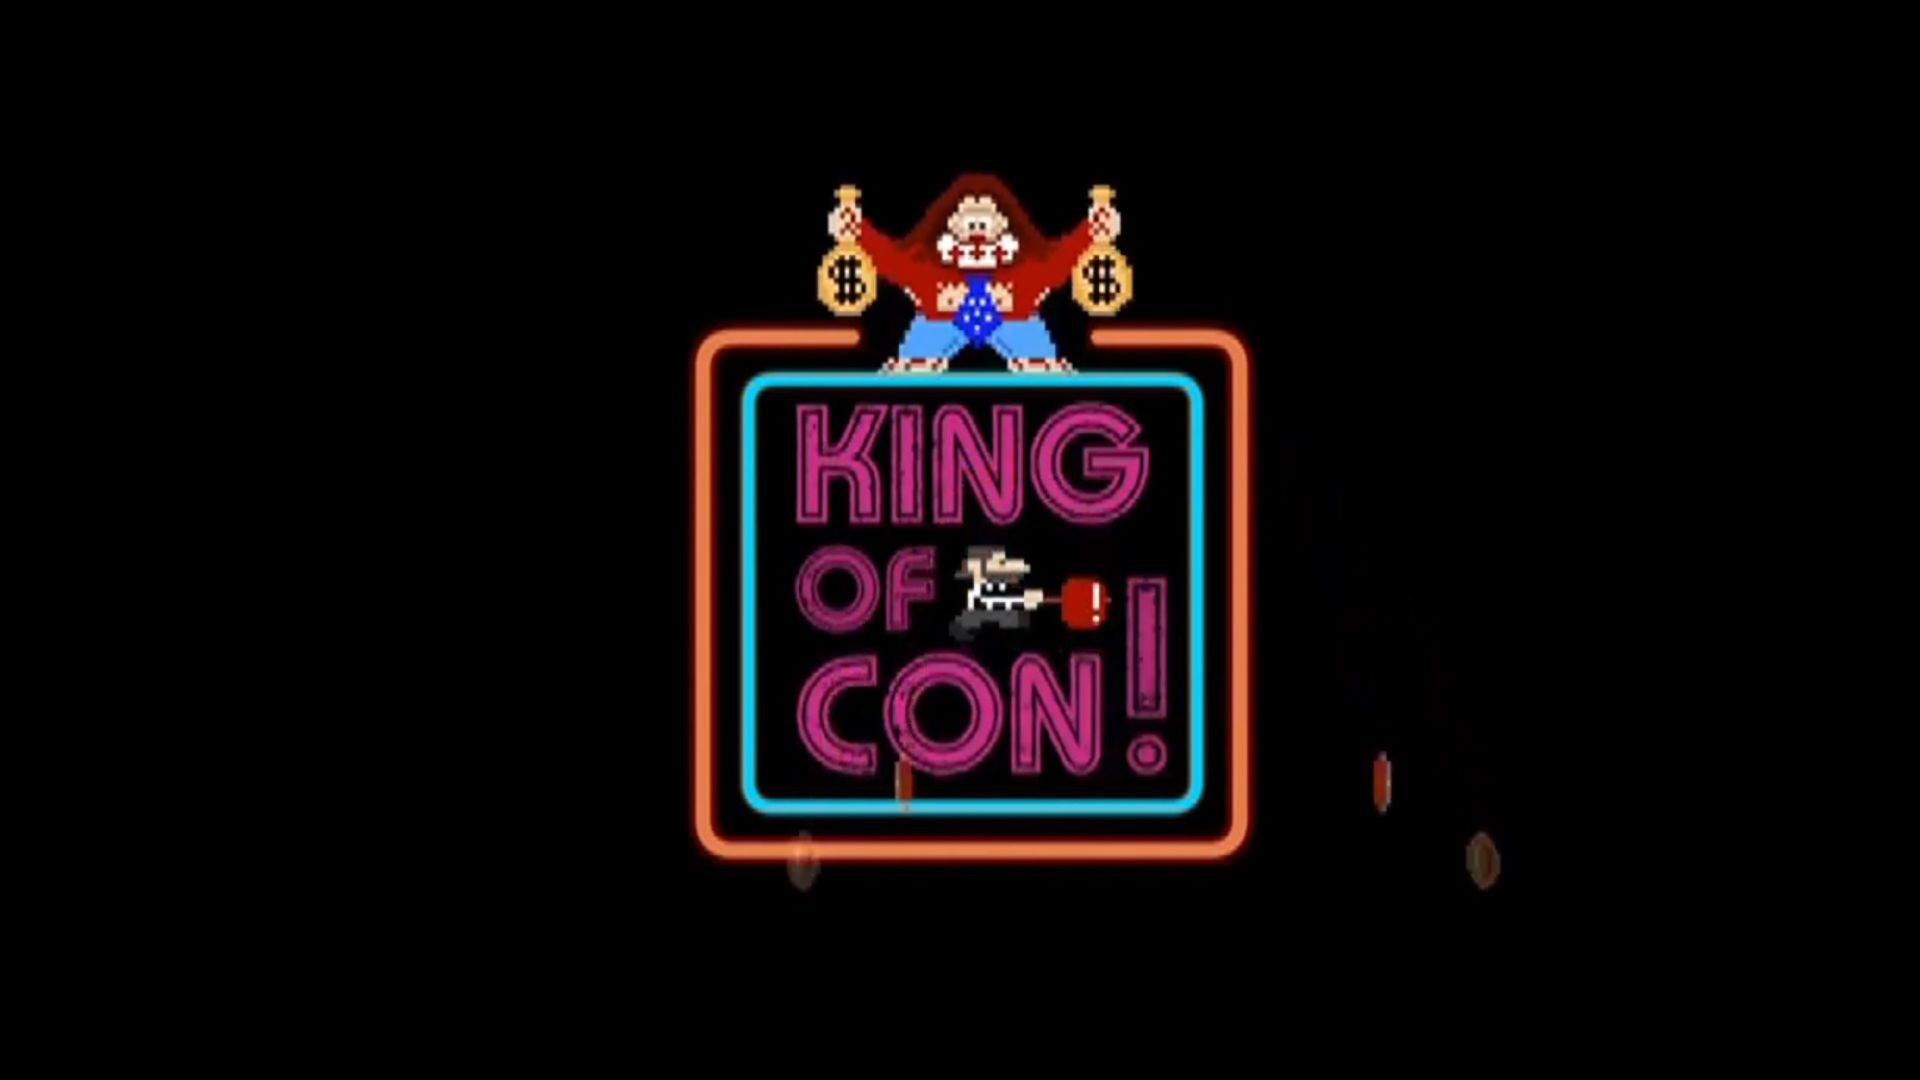 King Of Con! (Full documentary) - by Dwayne Richard